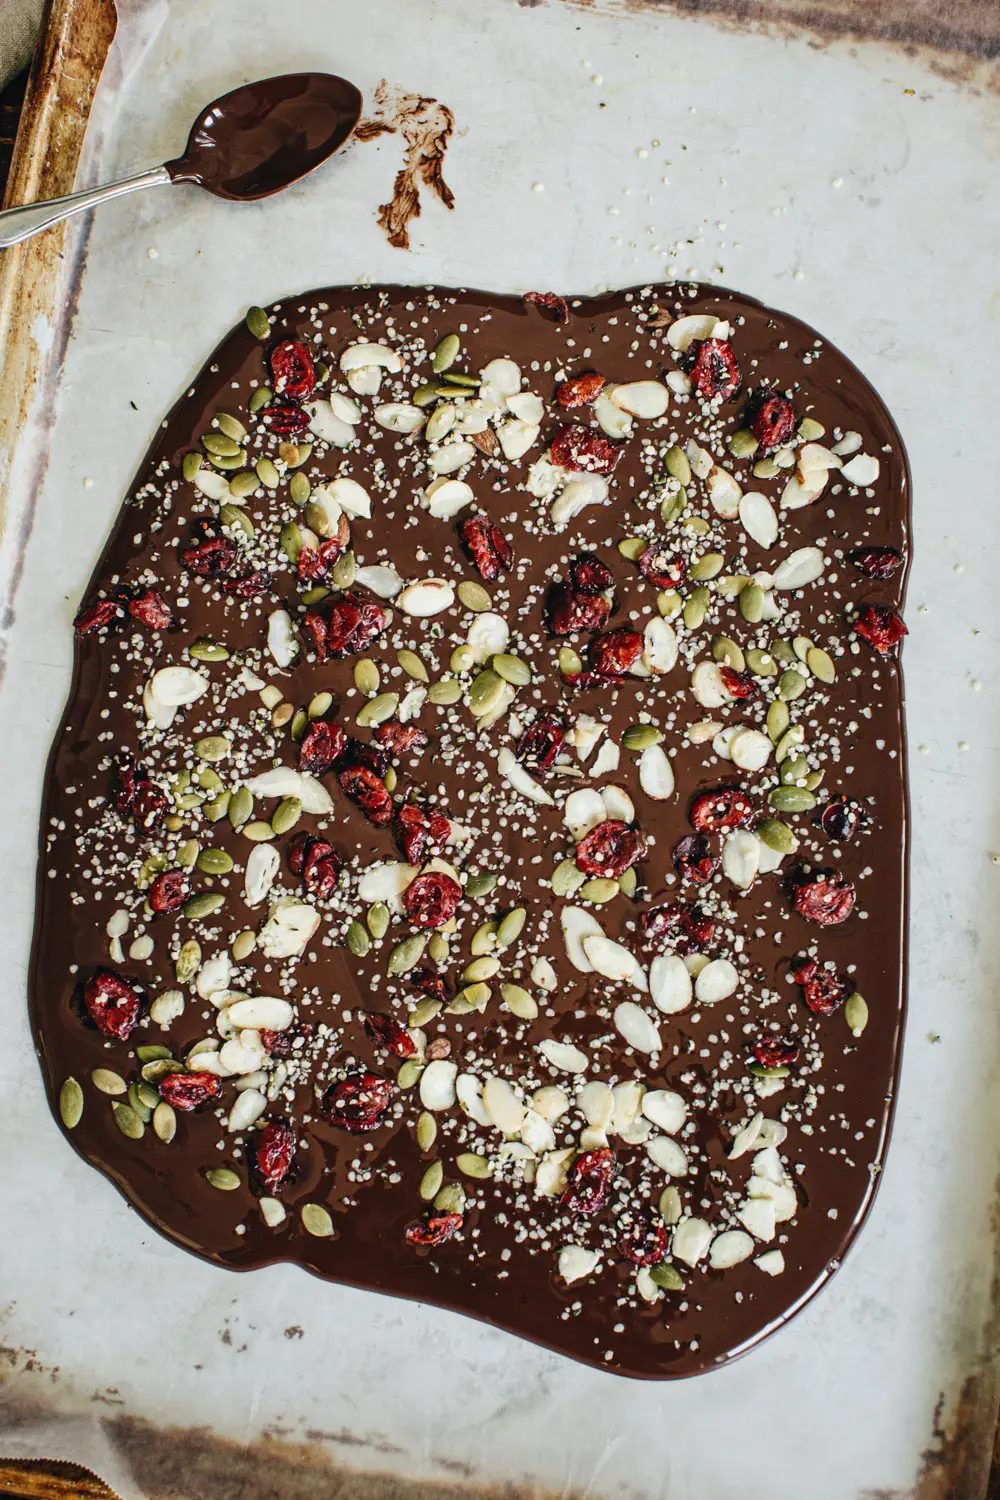 Healthy chocolate bark spread on parchment paper.